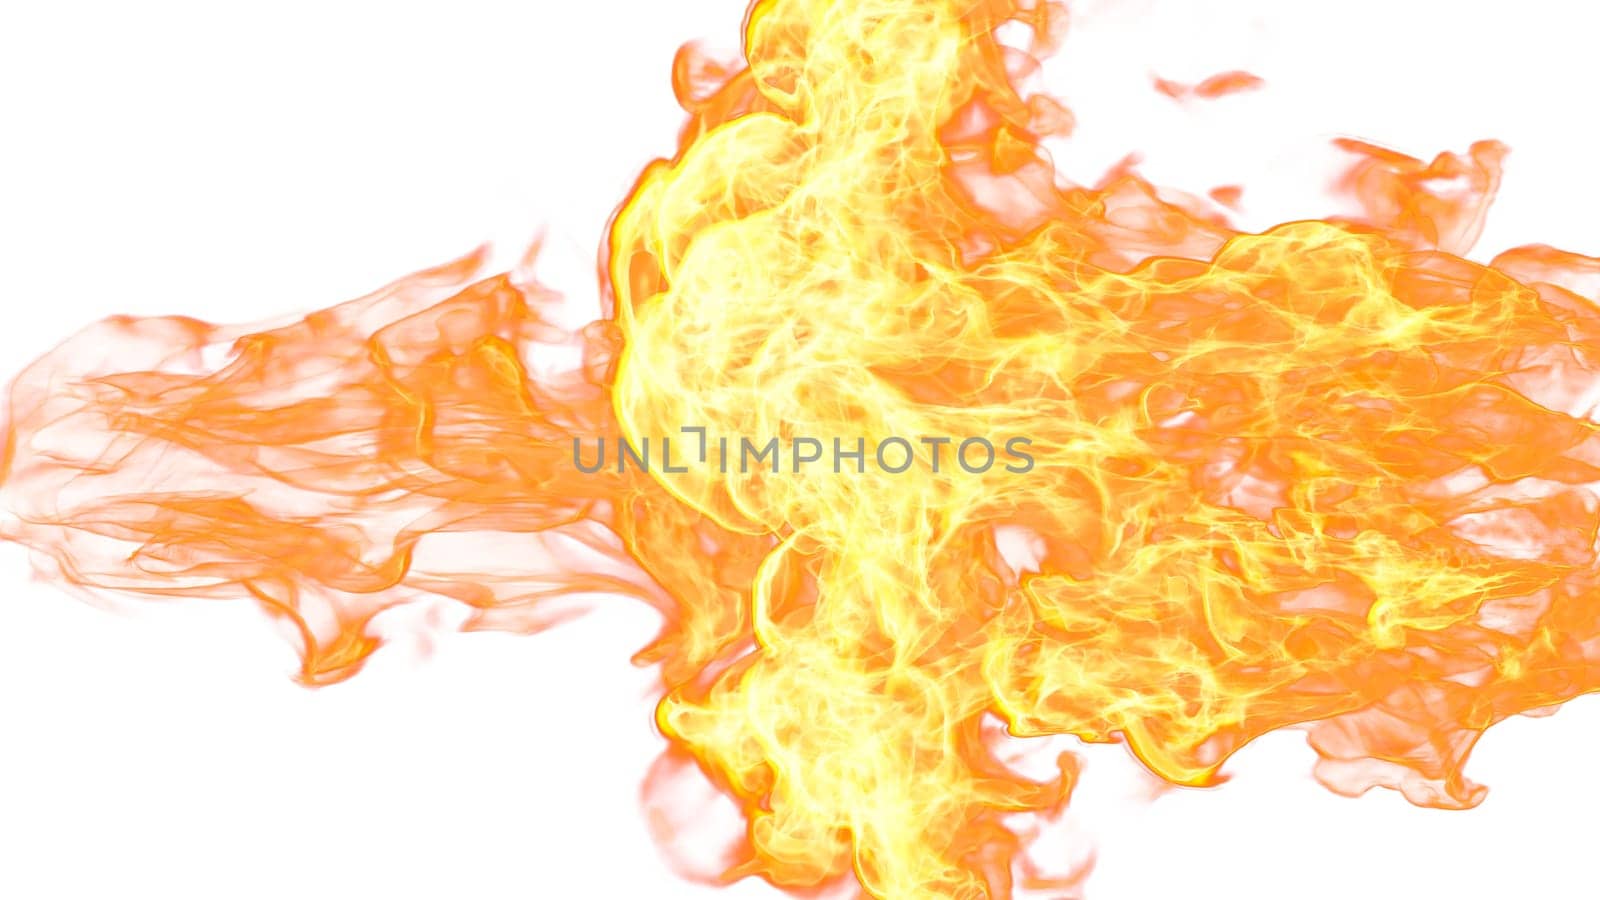 3d illustration. Tongues of flame collide from opposite sides on a white background. by mrwed54